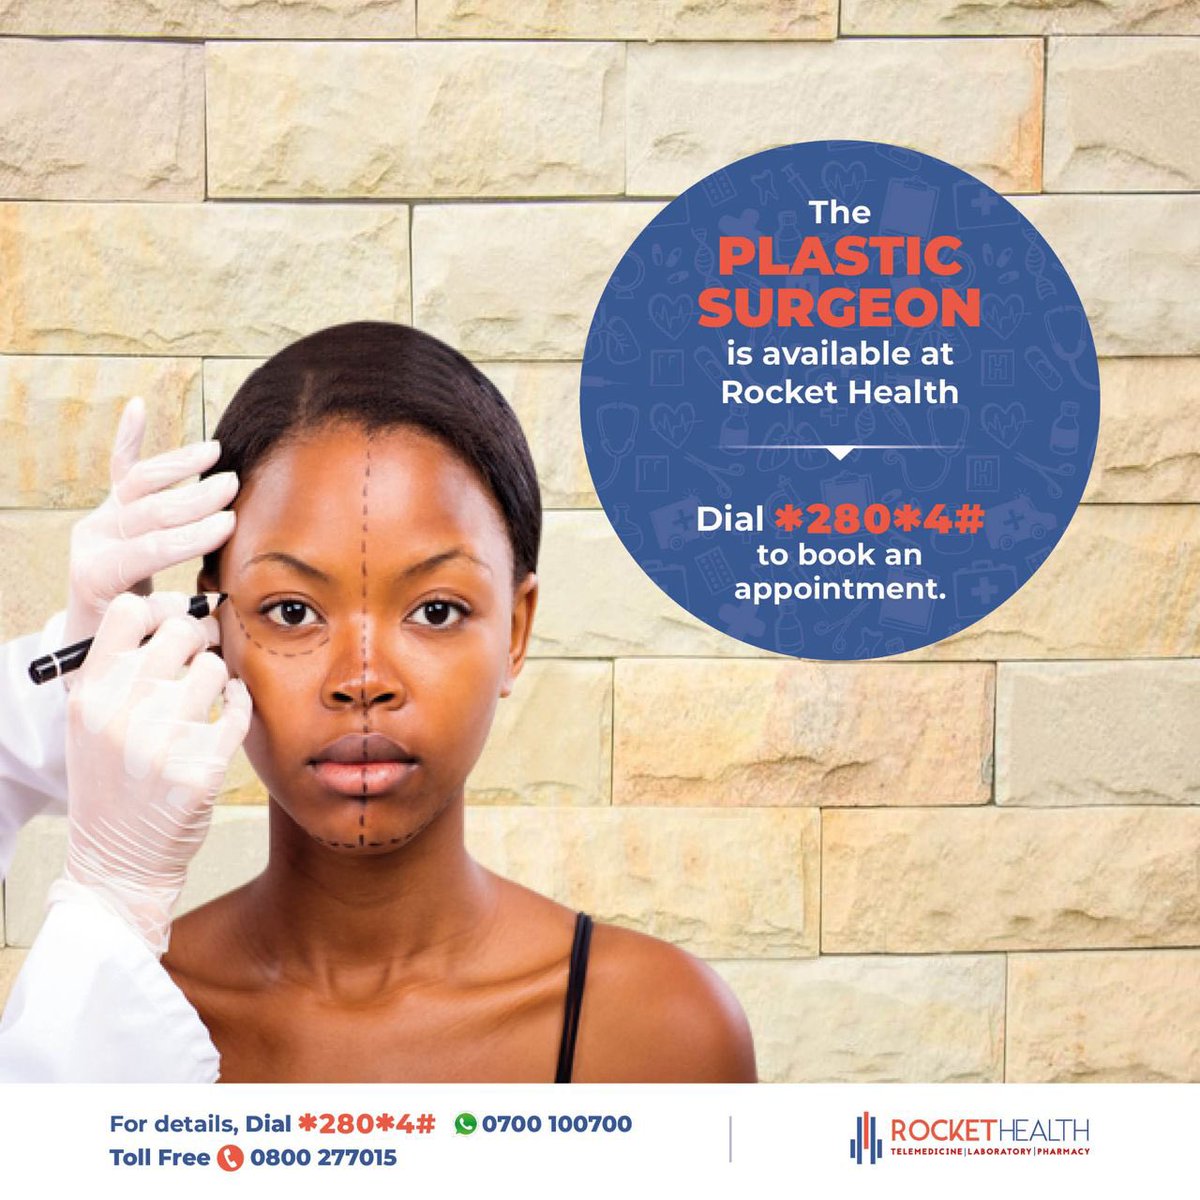 The plastic surgeon is available for consultations & surgical procedures at the @RocketHealthUG Gayaza clinic. Dial *280*4# to schedule an appointment.